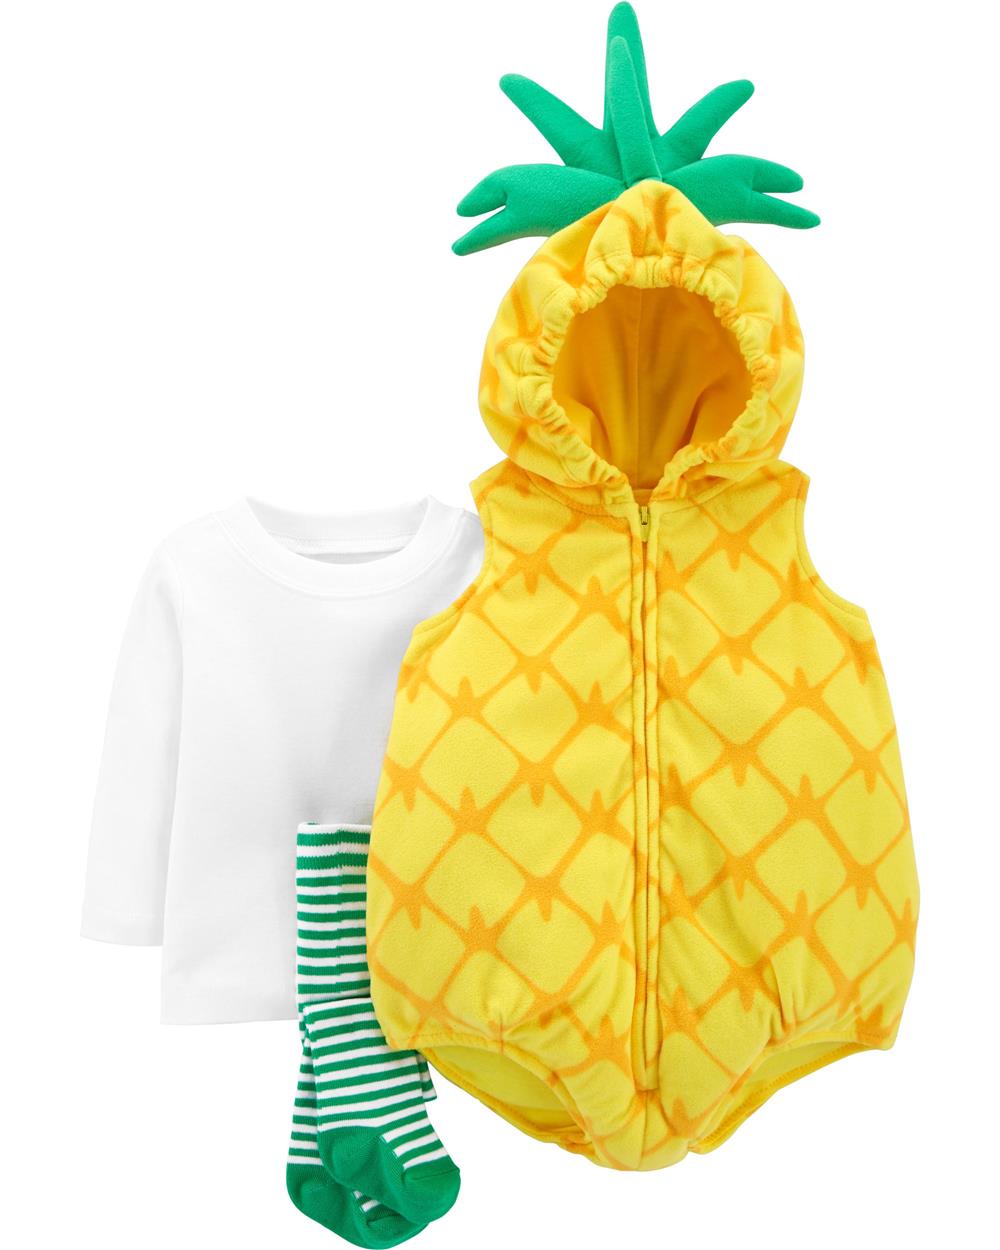 Carters Girls 0-24 Months Pineapple Costume